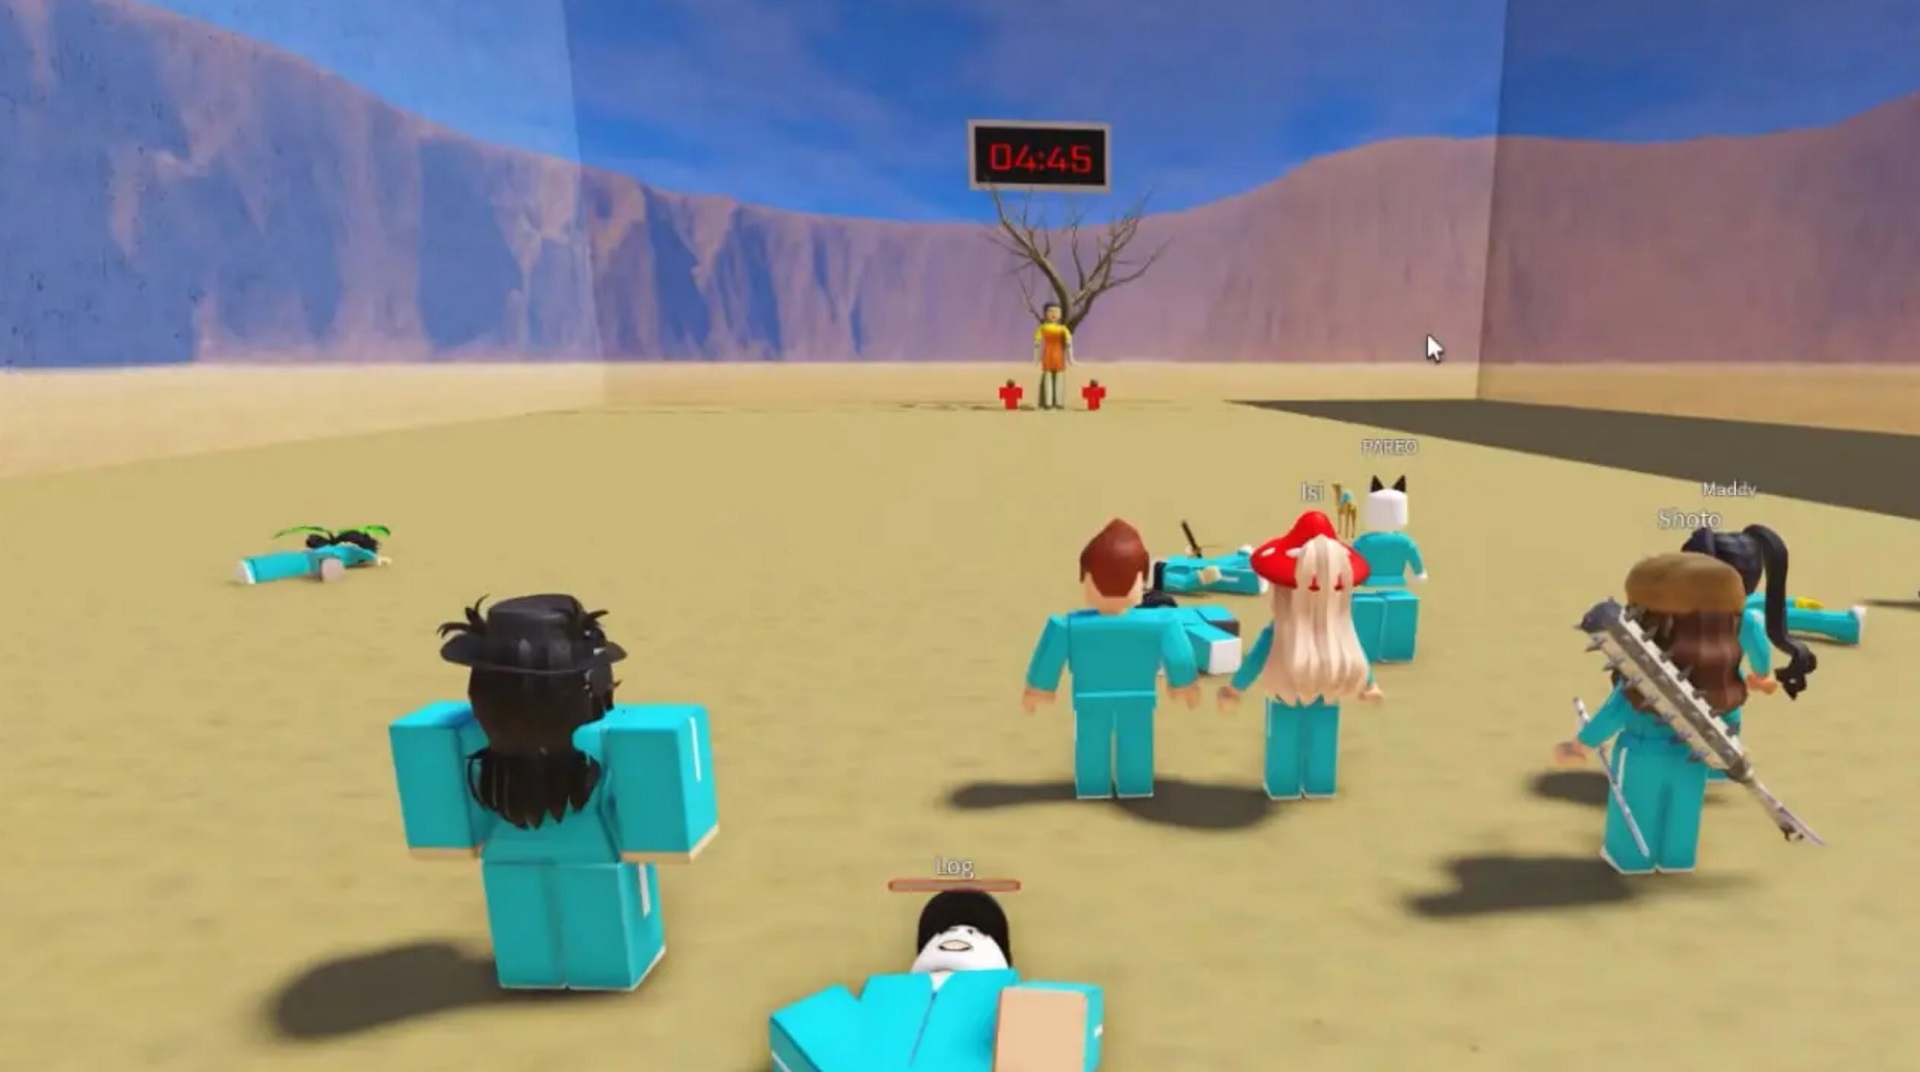 How to play squid game on roblox